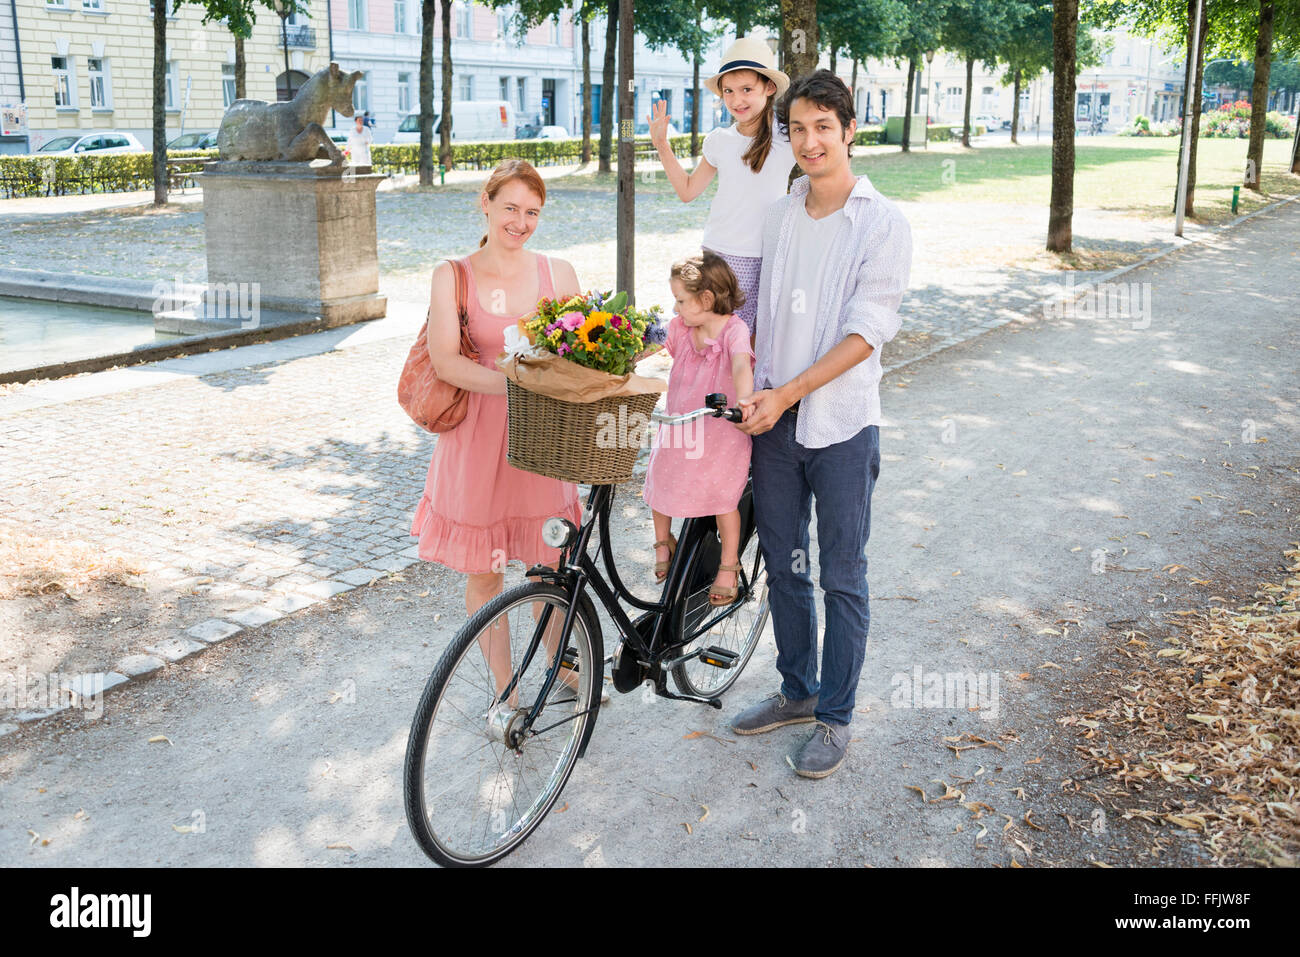 Family with two children and bicycle Stock Photo